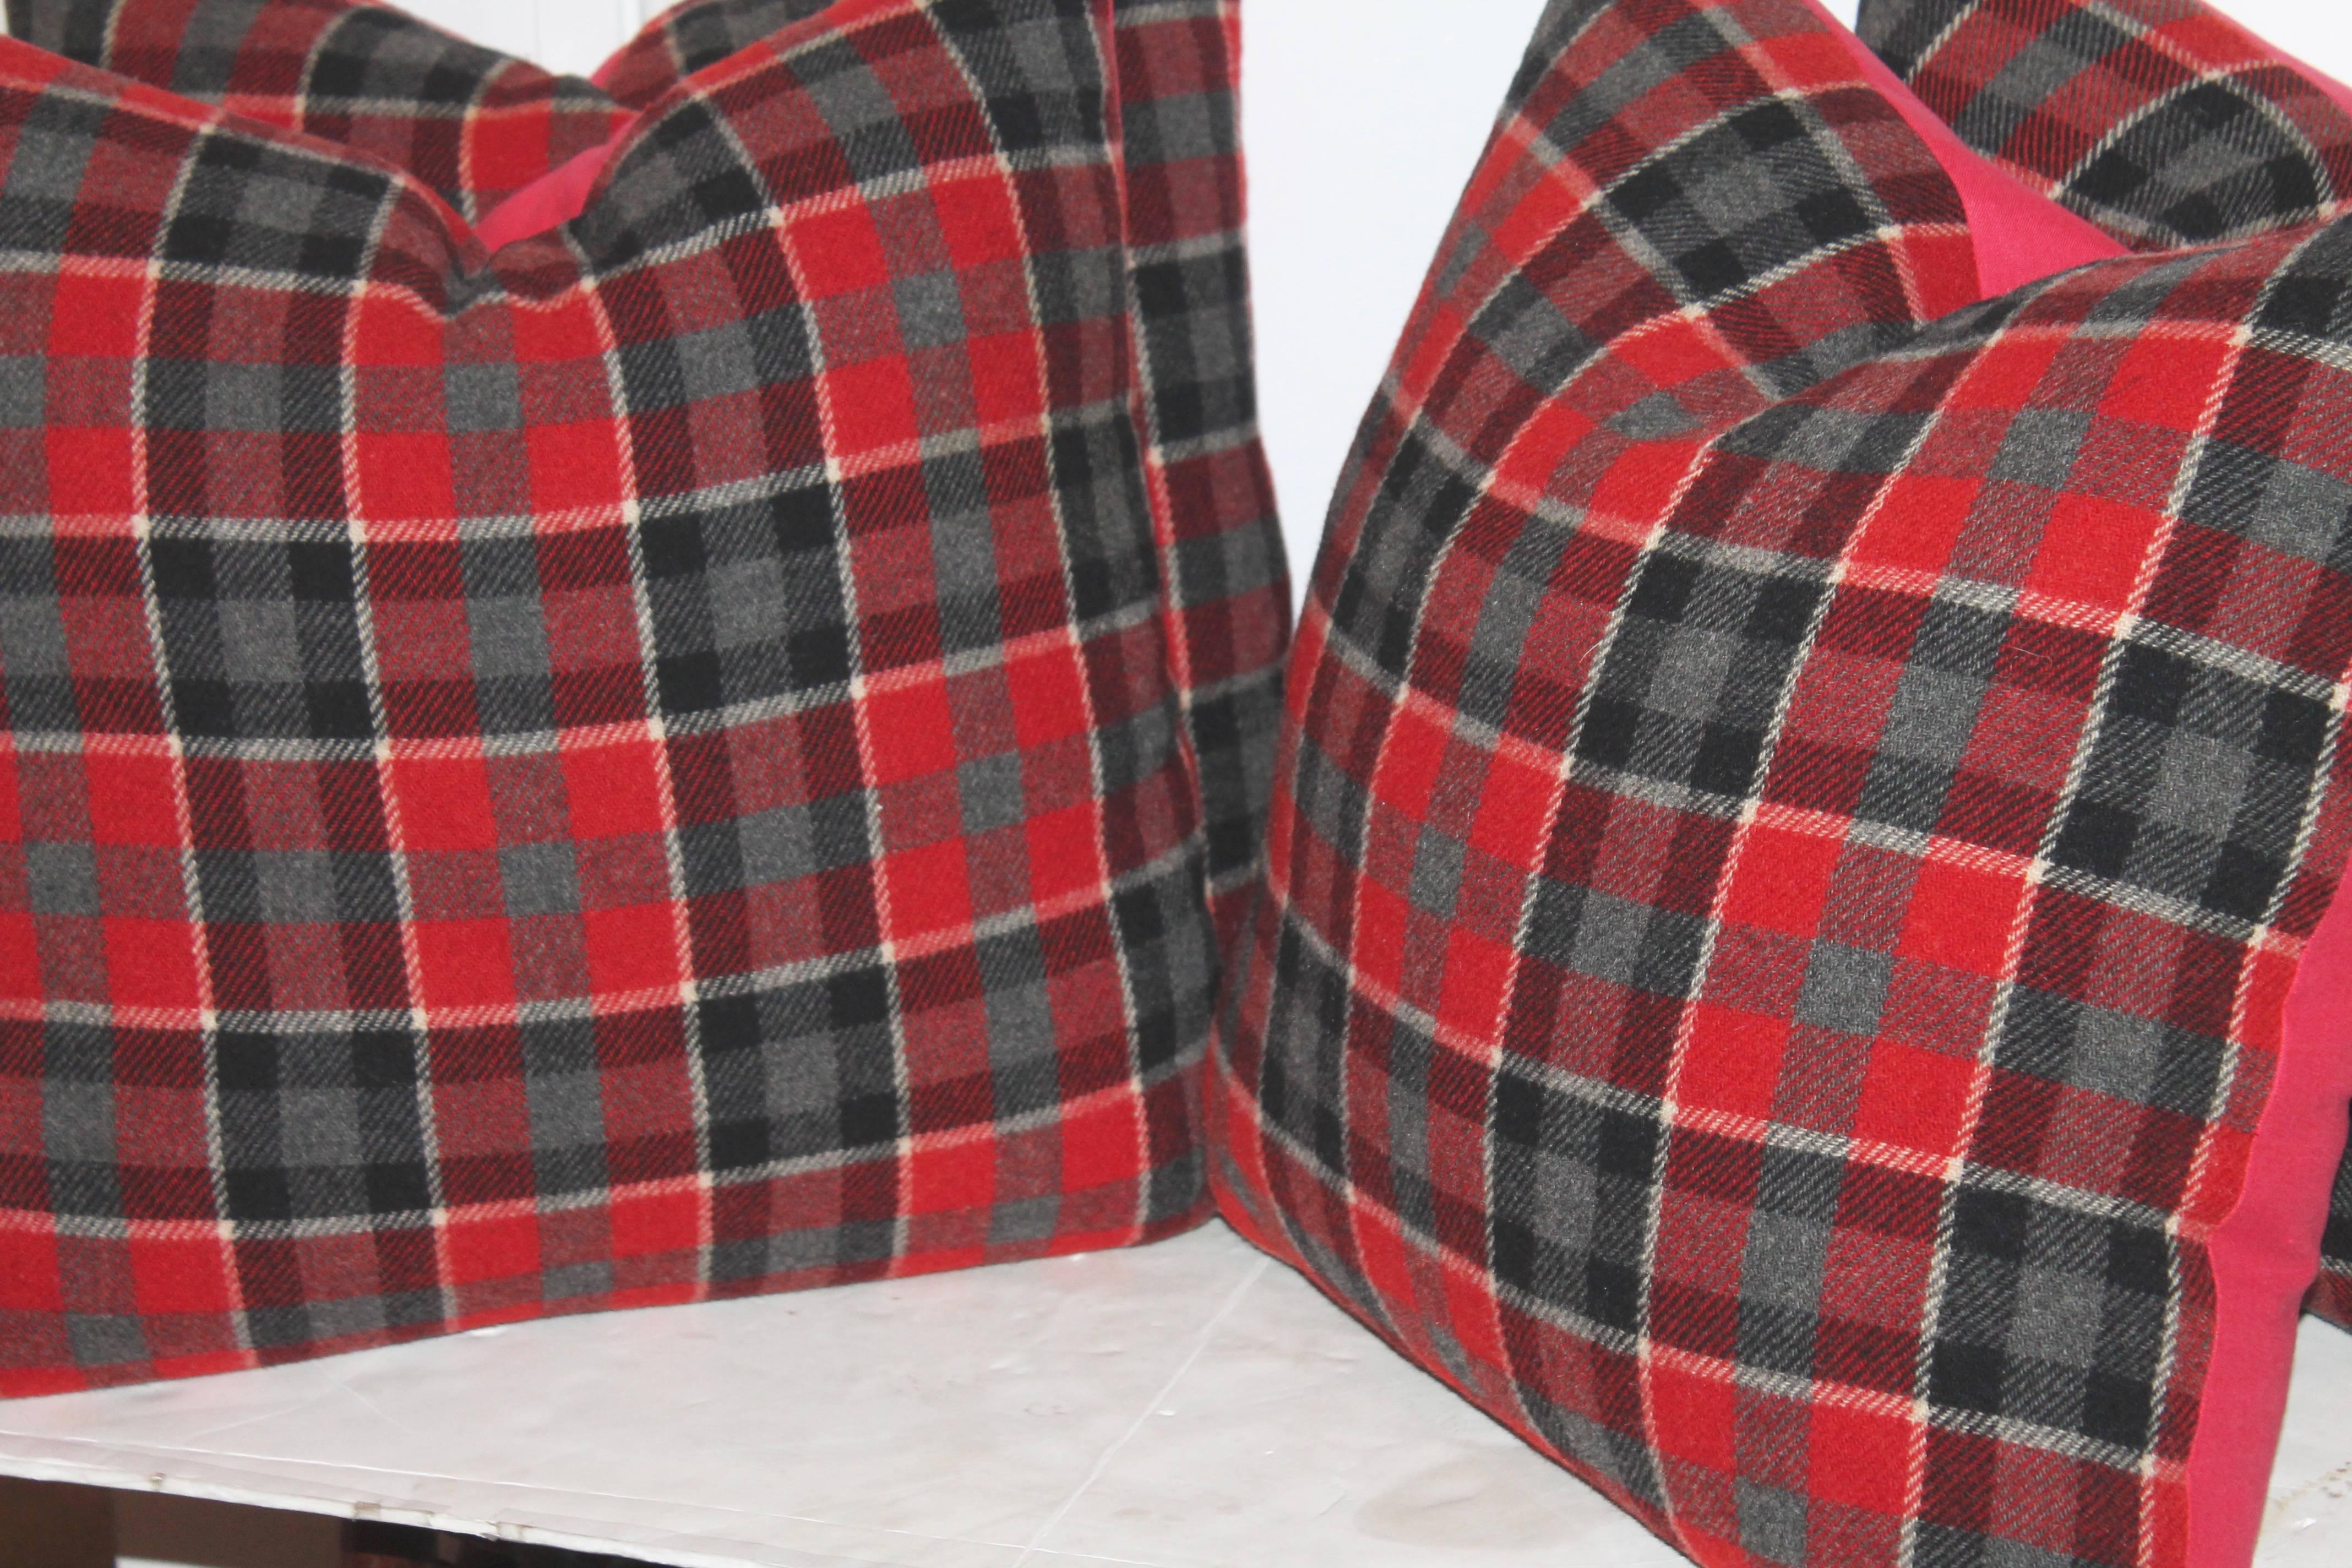 These fantastic soft wool saddle blanket pillows are sold in pairs. The backing is in a soft red cotton linen. Down and feather fill. Two pairs in stock.